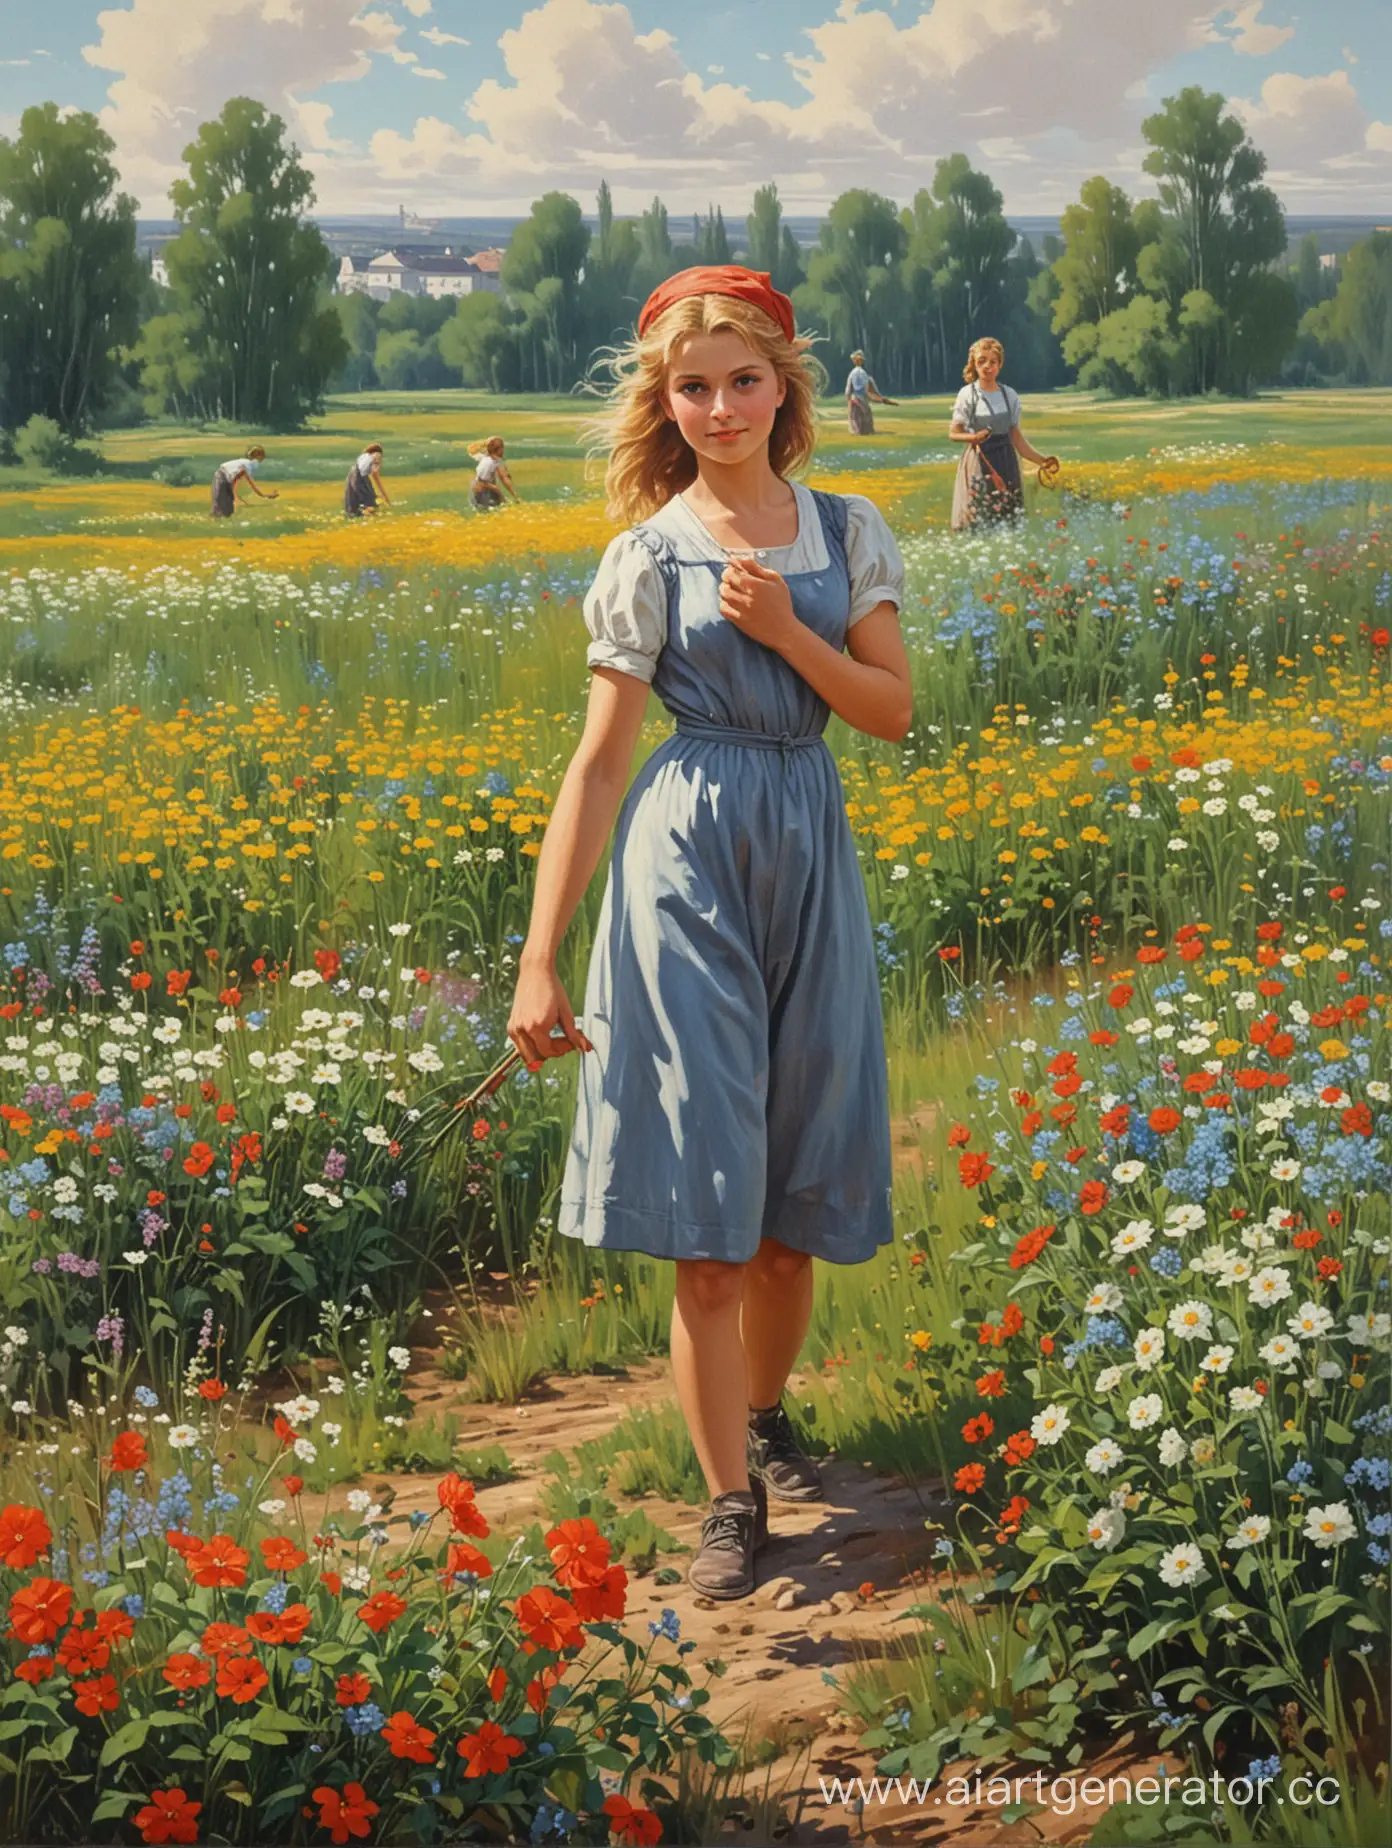 Soviet-Era-Painting-Girls-Picking-Flowers-in-a-Blossoming-Field